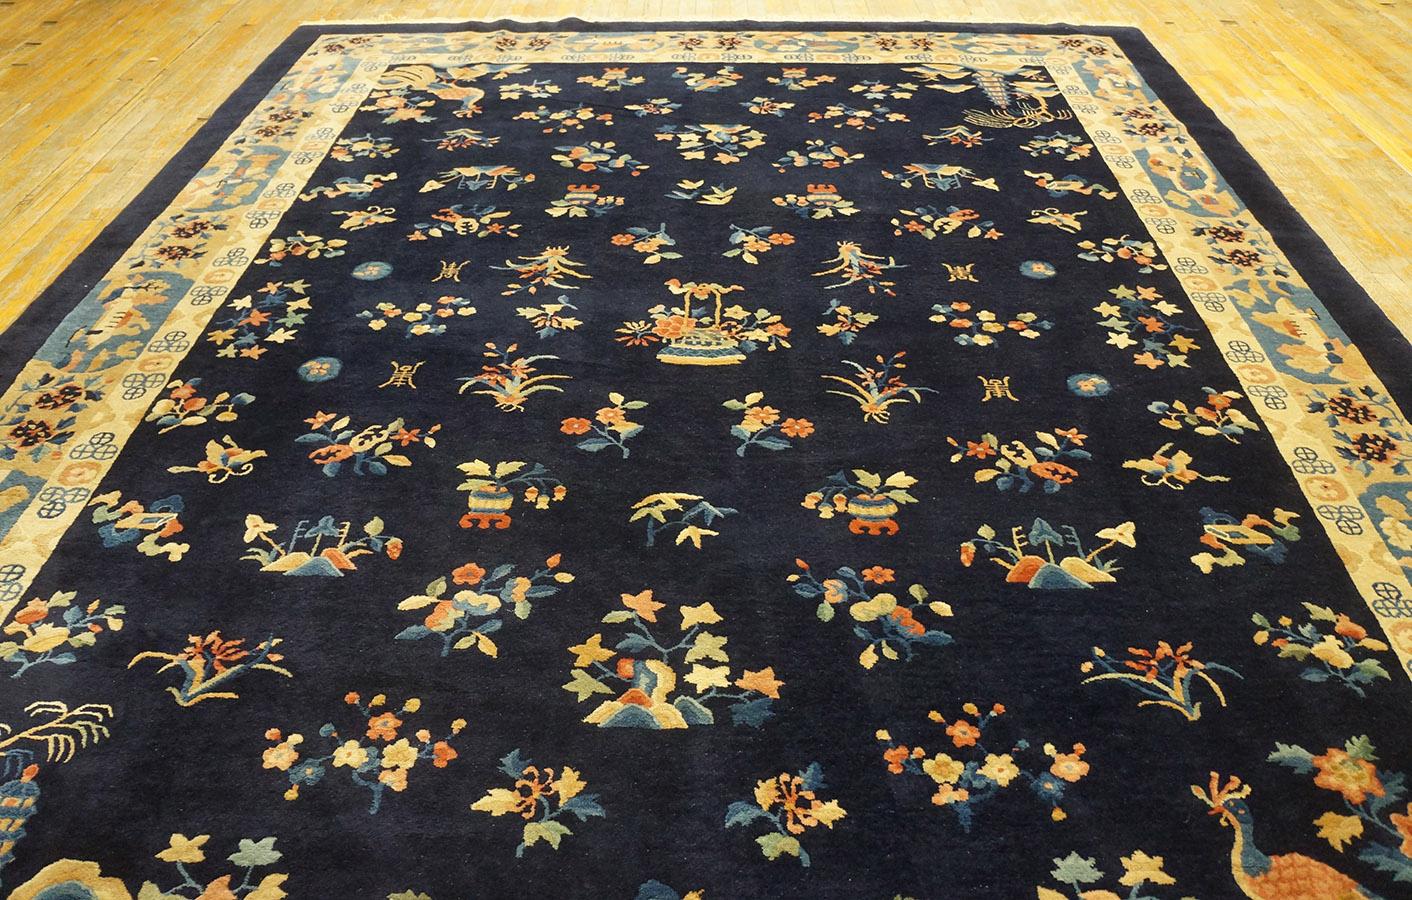 Early 20th Century Chinese Peking Carpet ( 9'2'' x 11'8'' - 280 x 355 ) For Sale 2